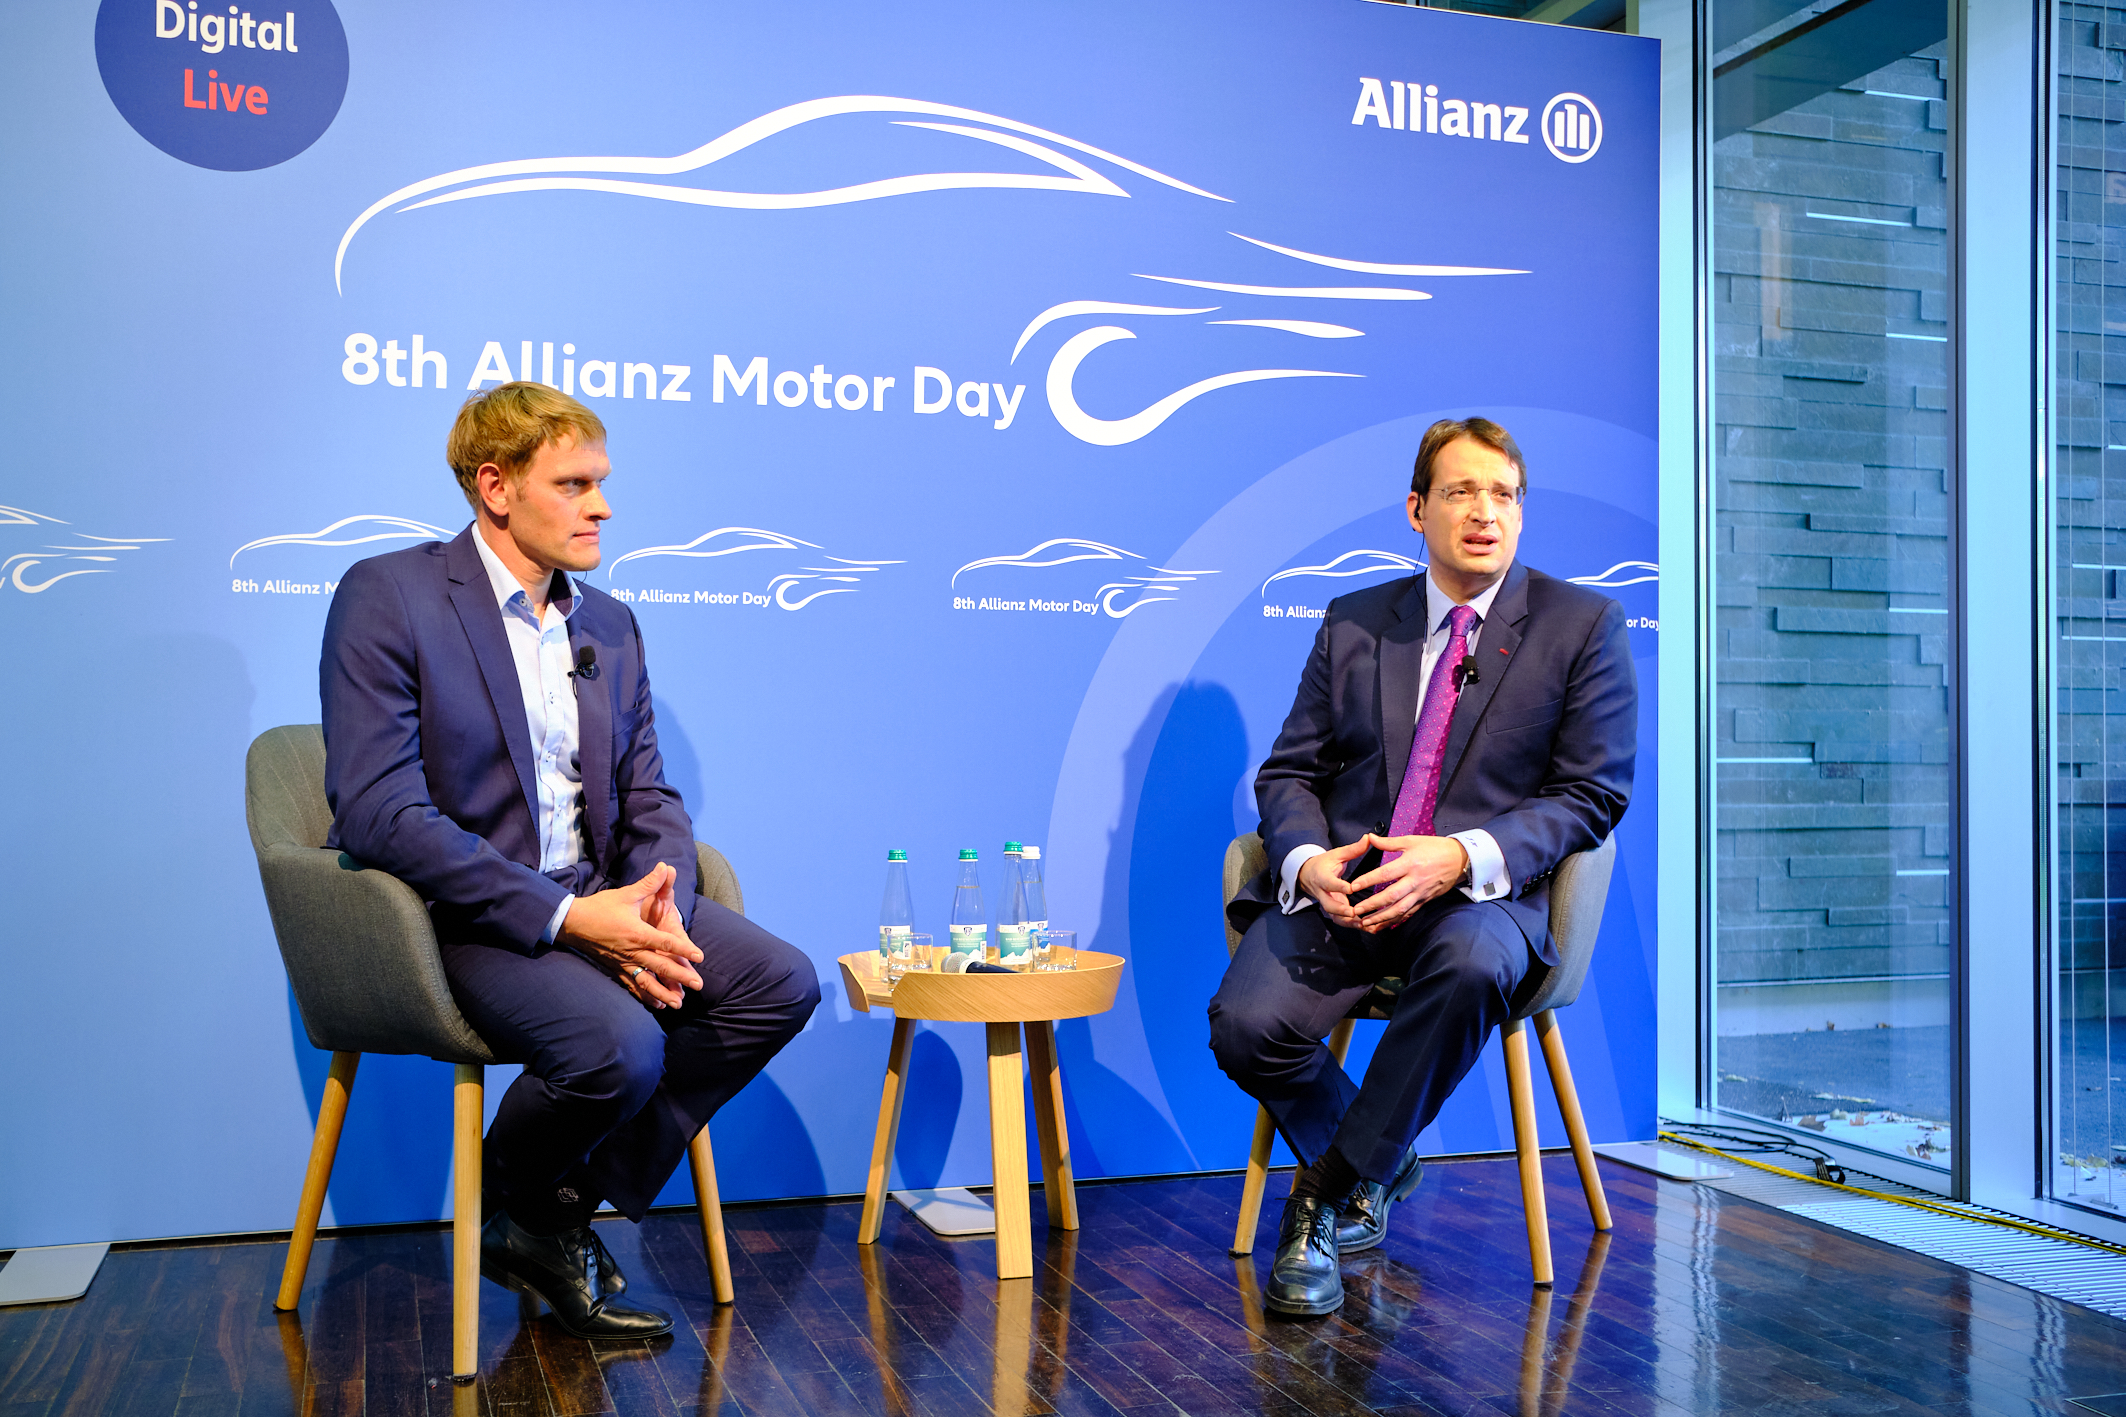 Rico Förster (Head of Commercial Motor, Allianz SE) and Jochen Haug (Chief Claims Officer and Member of the Board of Management of Allianz Versicherungs-AG)were broadcasted from a second stage